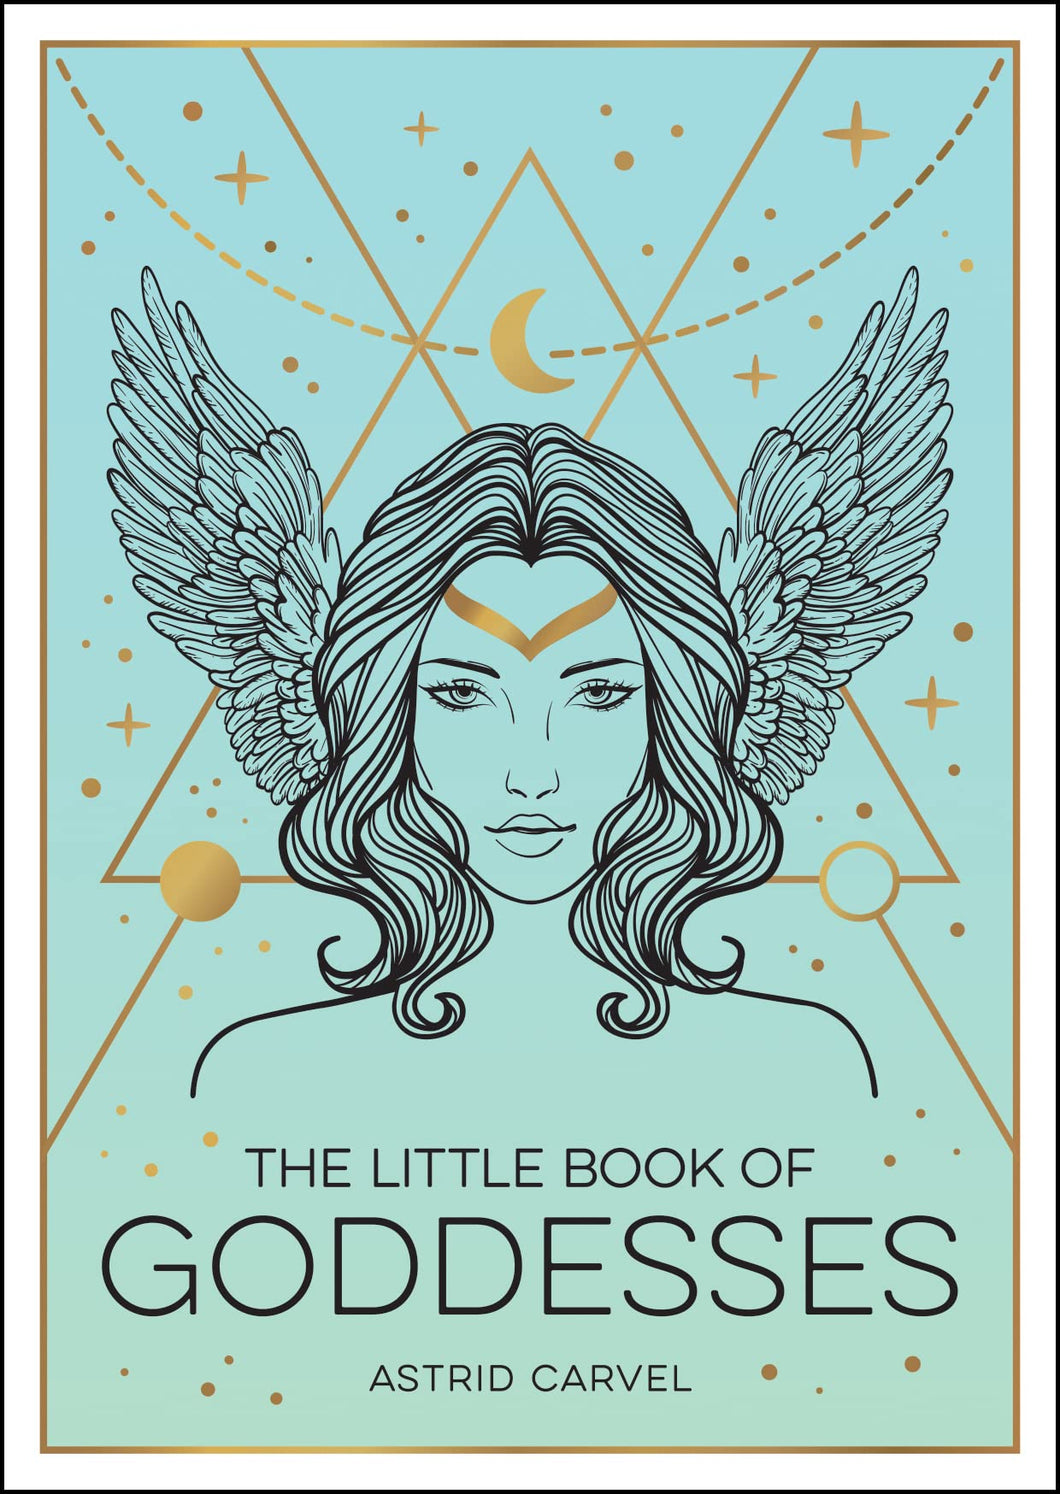 The Little Book of Goddesses by Astrid Carvel (paperback)